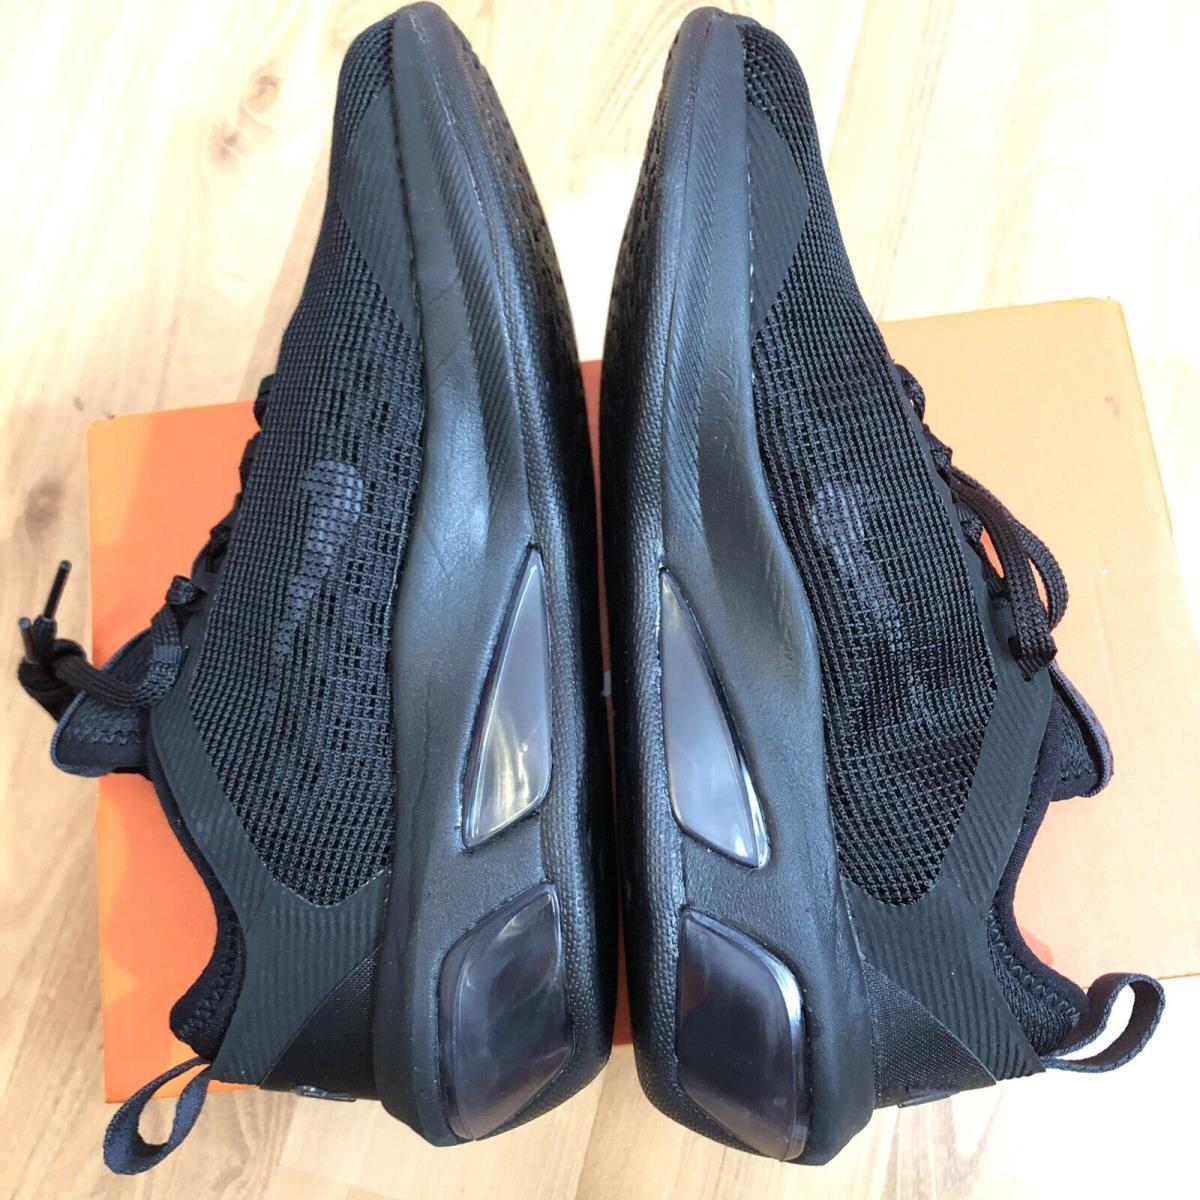 Nike shoes Air Max Fly - Black 4